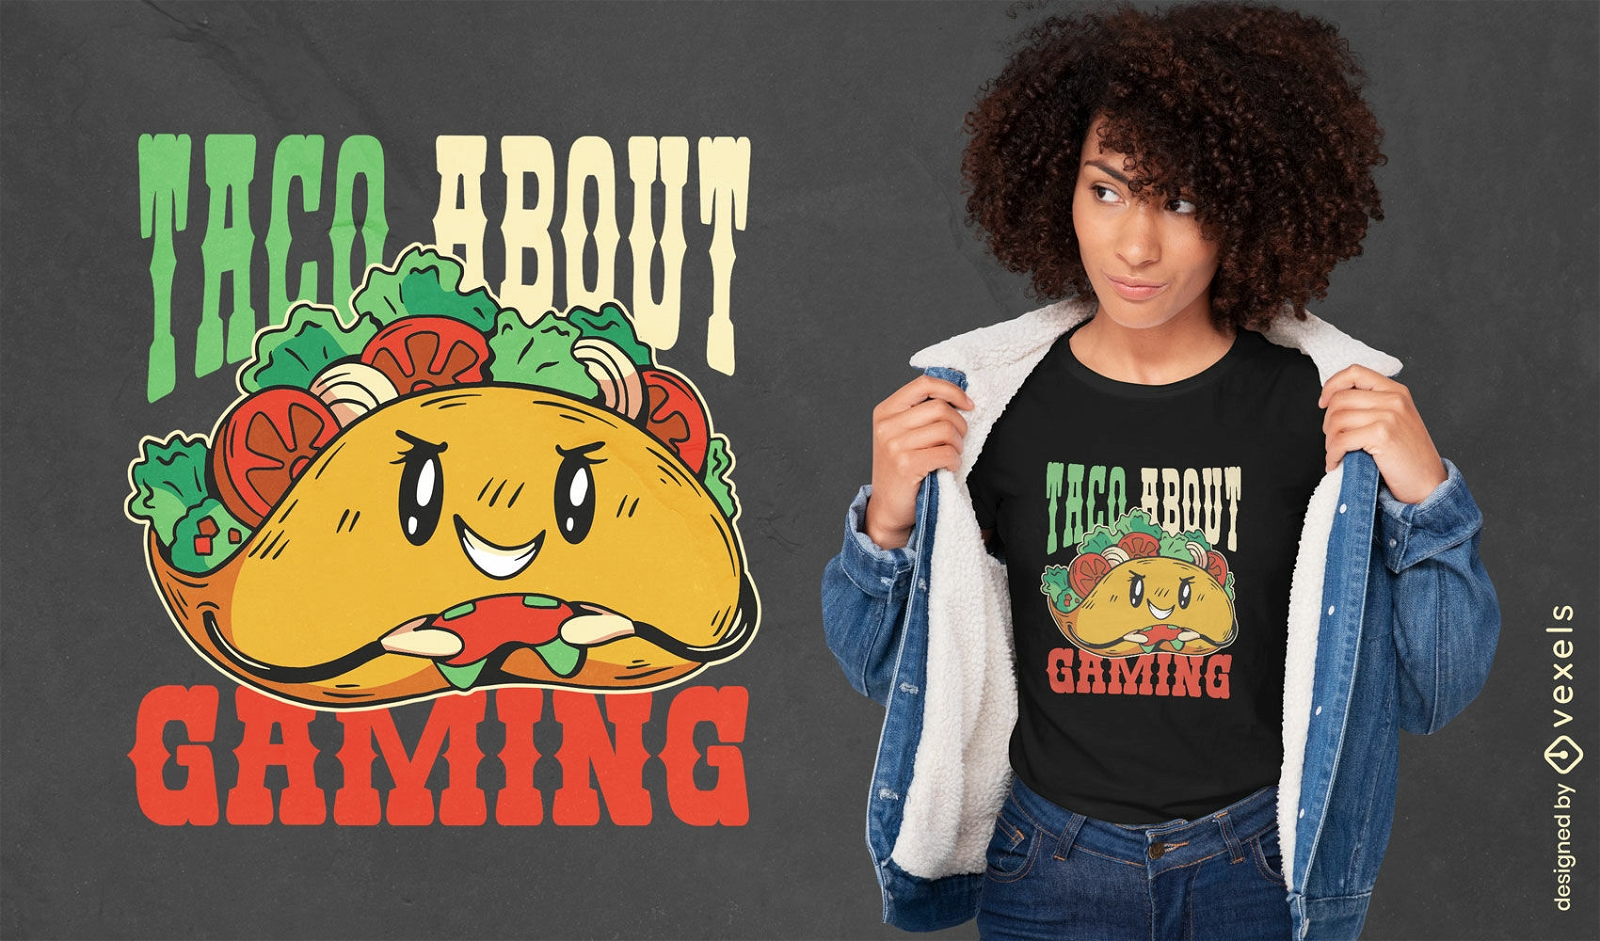 Taco about gaming cute t-shirt design